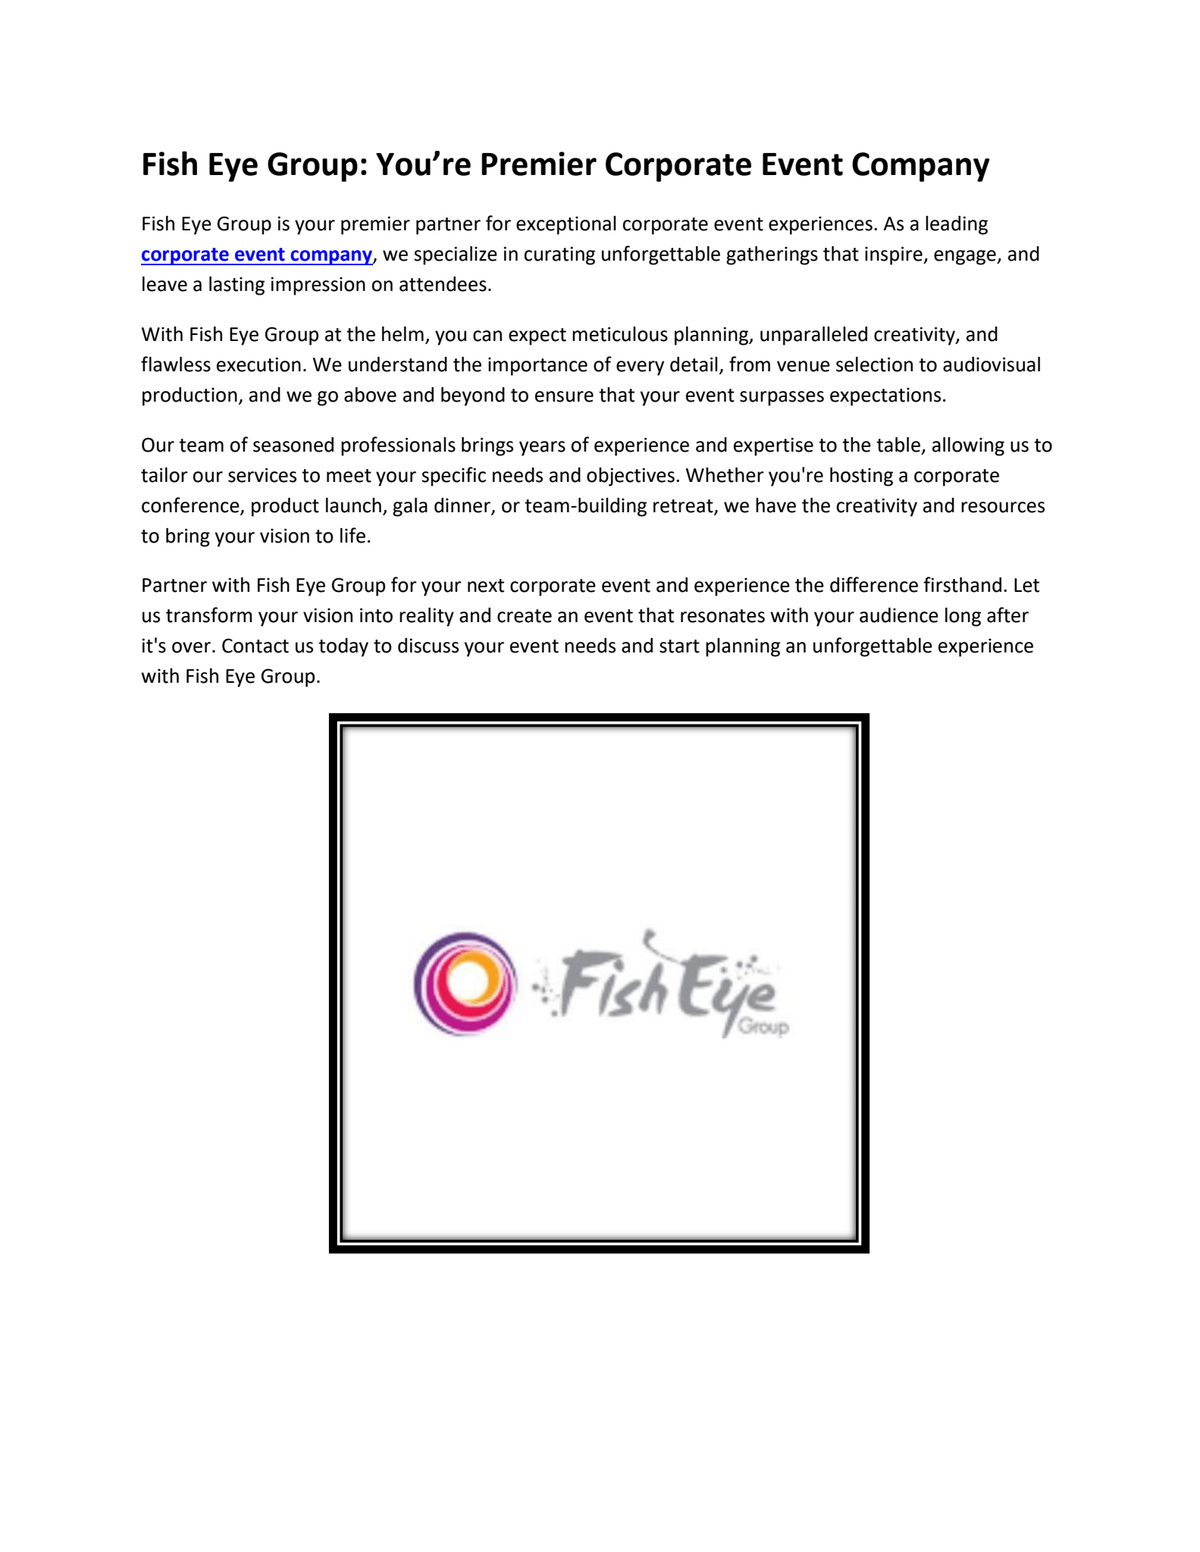 Dropbox - Corporate Event Company_fisheyegroup.pdf - Simplify your life